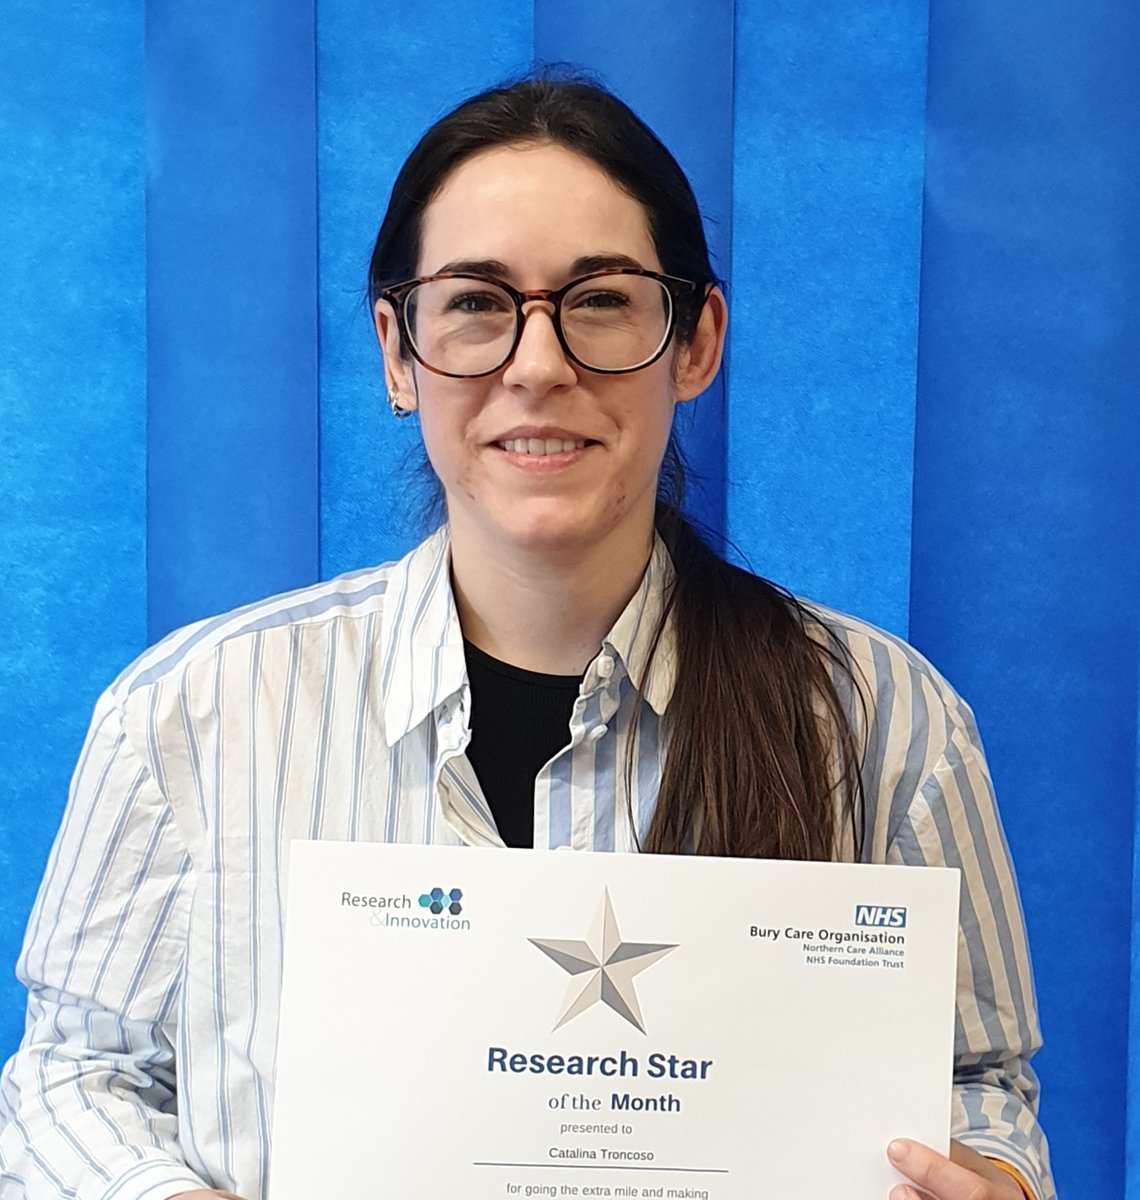 Super-efficient & helpful Catalina Troncoso is our Research Star of the Month @buryco_nhs. Administrator Catalina has made a huge impact in a short time in the Gastroenterology research team -she has a proactive attitude & many sponsors say they wish other sites had a Catalina!